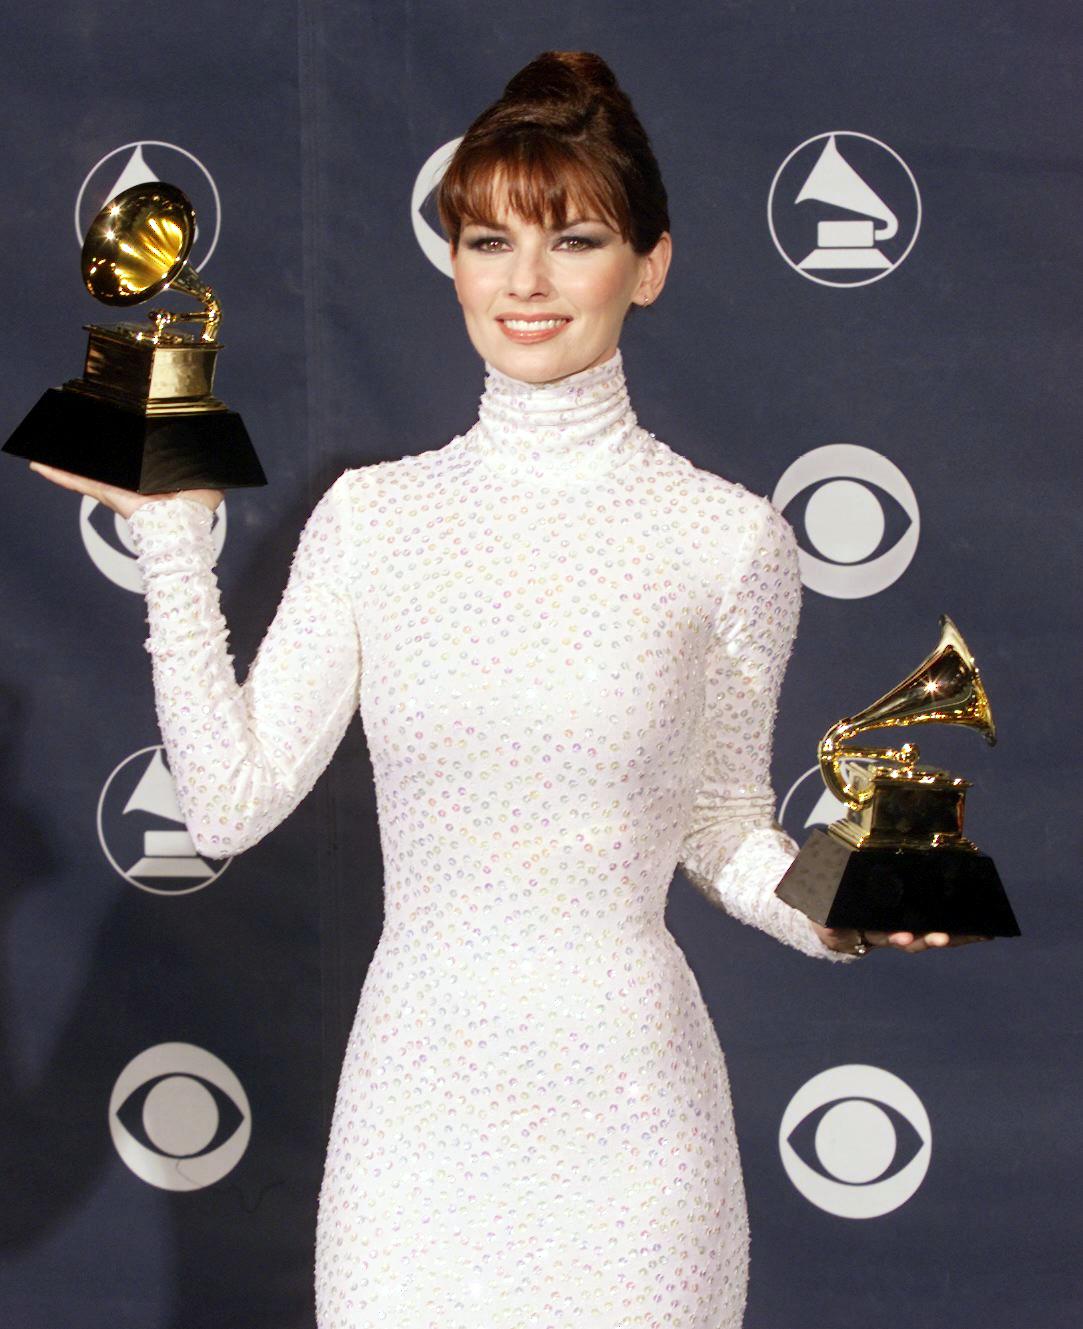 Shania Twain holding two Grammy Awards for Best Country Song and Best Female Country Vocal in LA, 1999 | Photo: Getty Images 